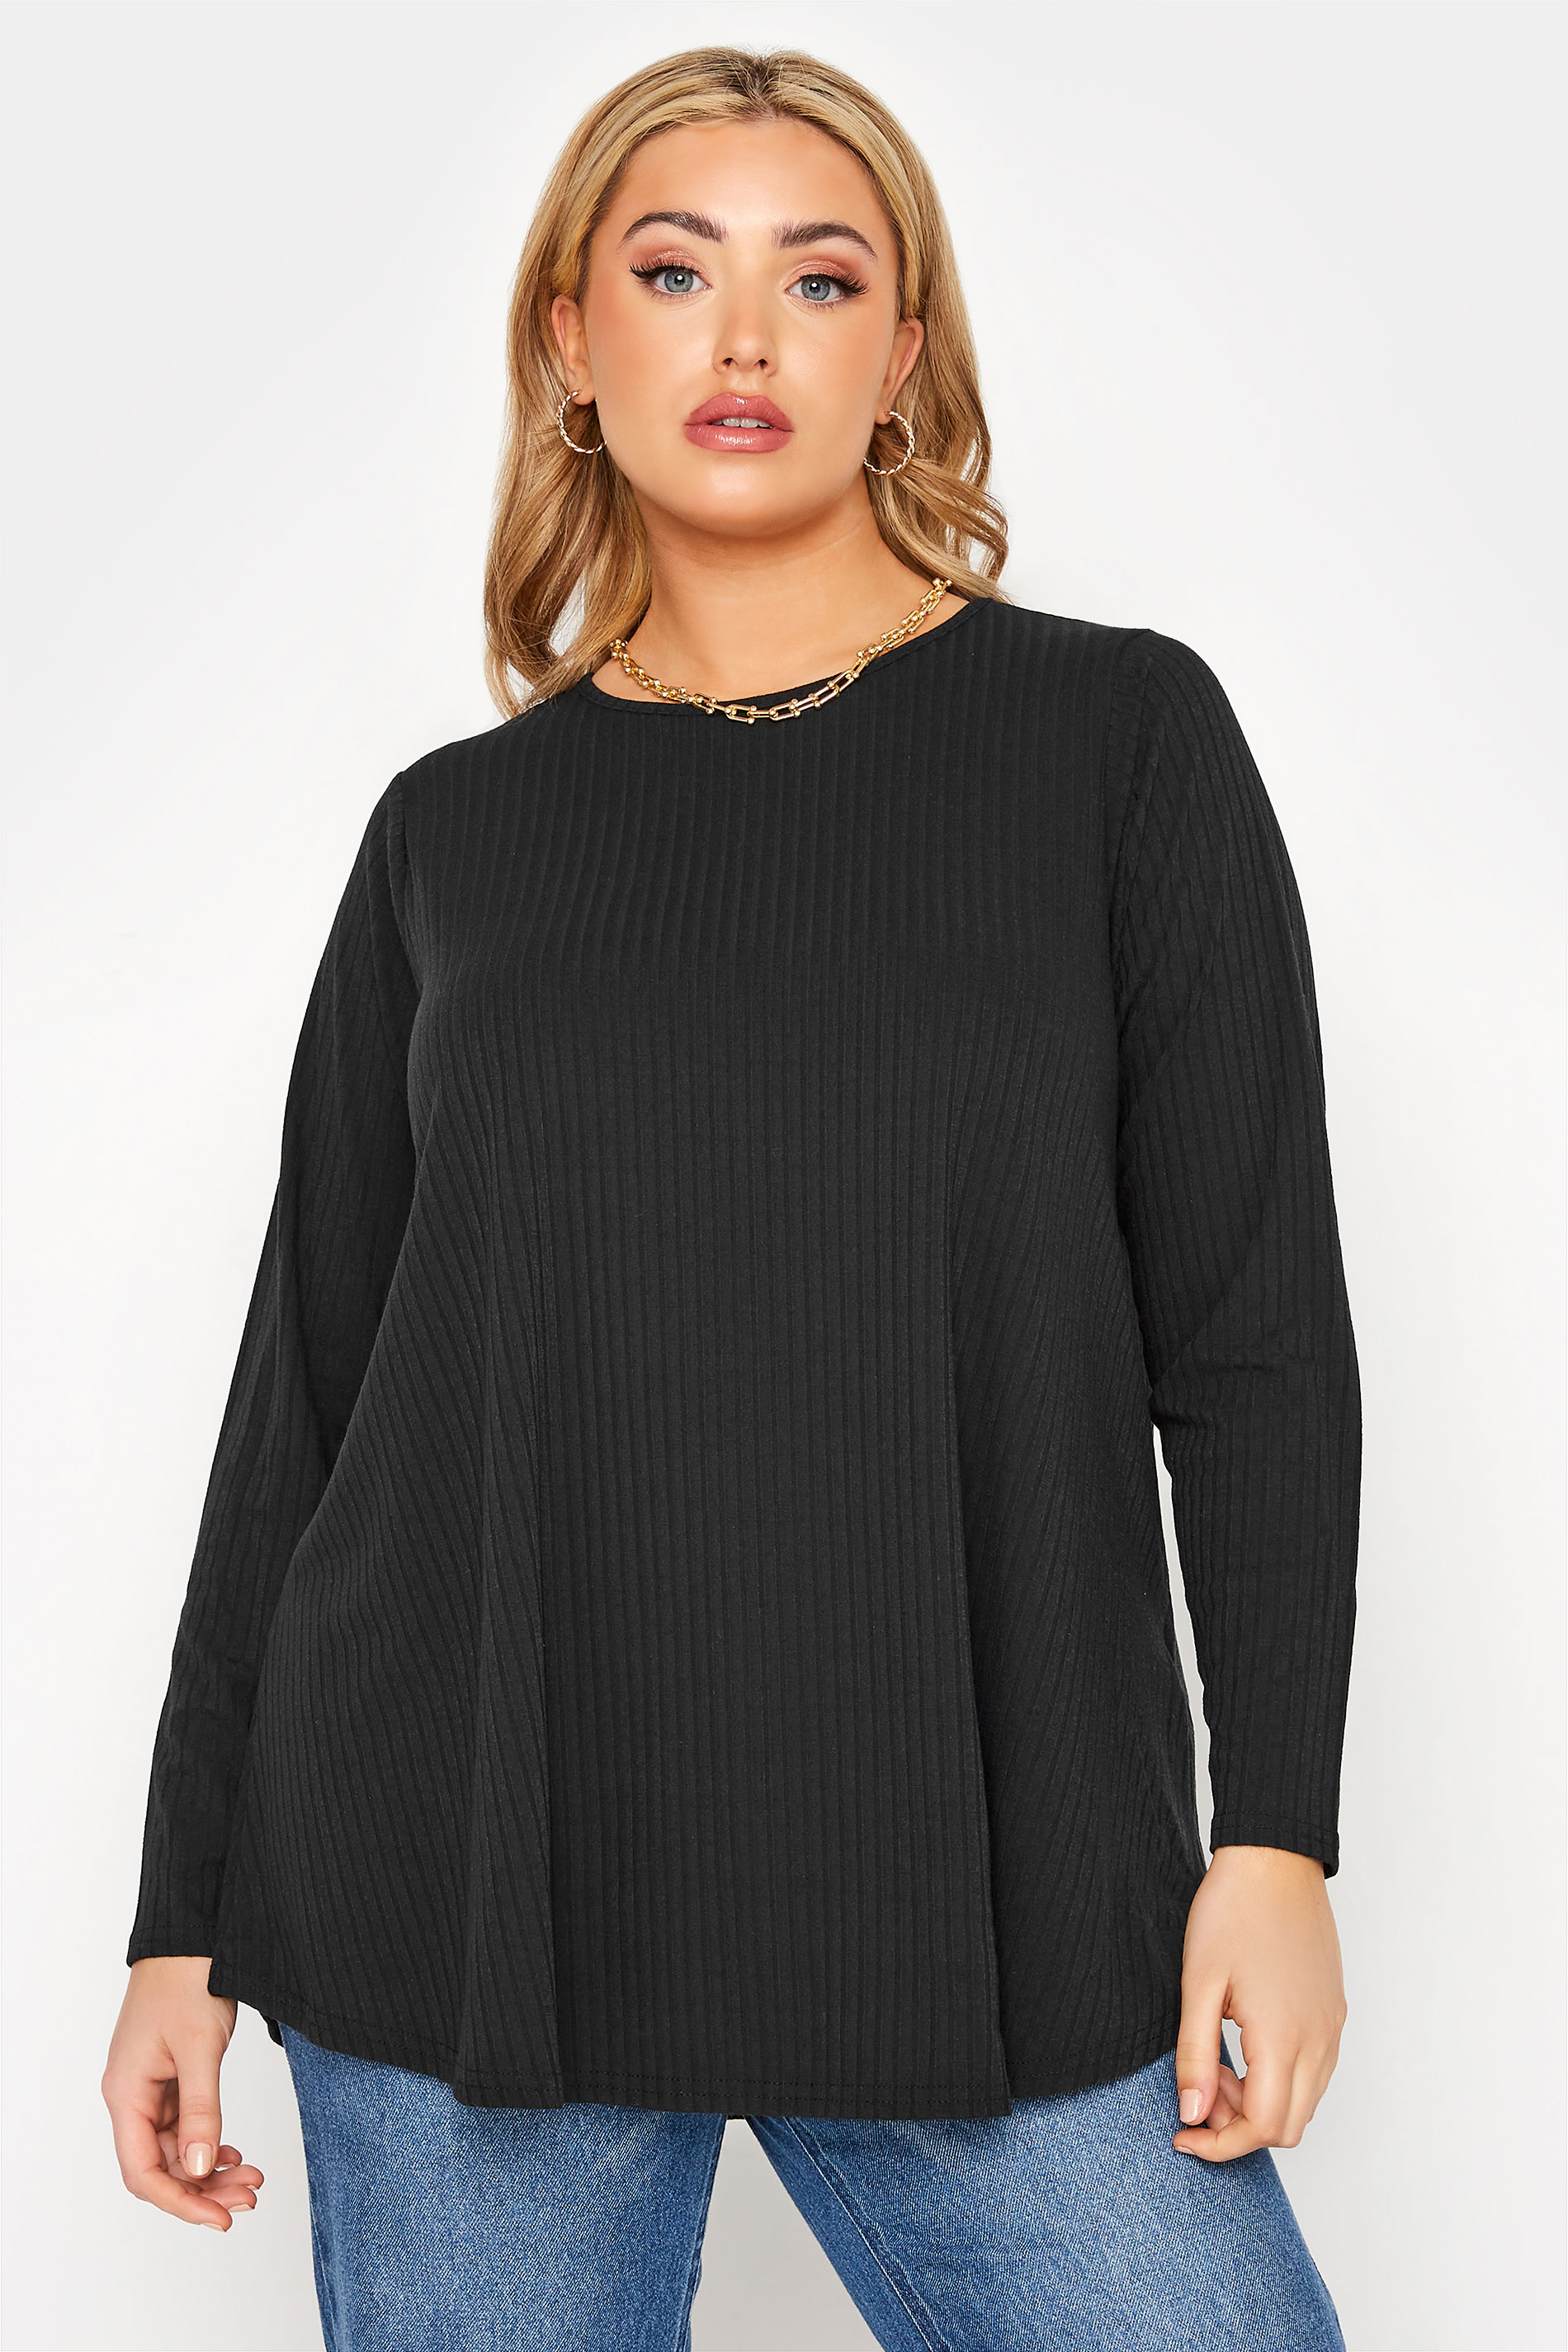 LIMITED COLLECTION Curve Black Ribbed Long Sleeve Top_A.jpg